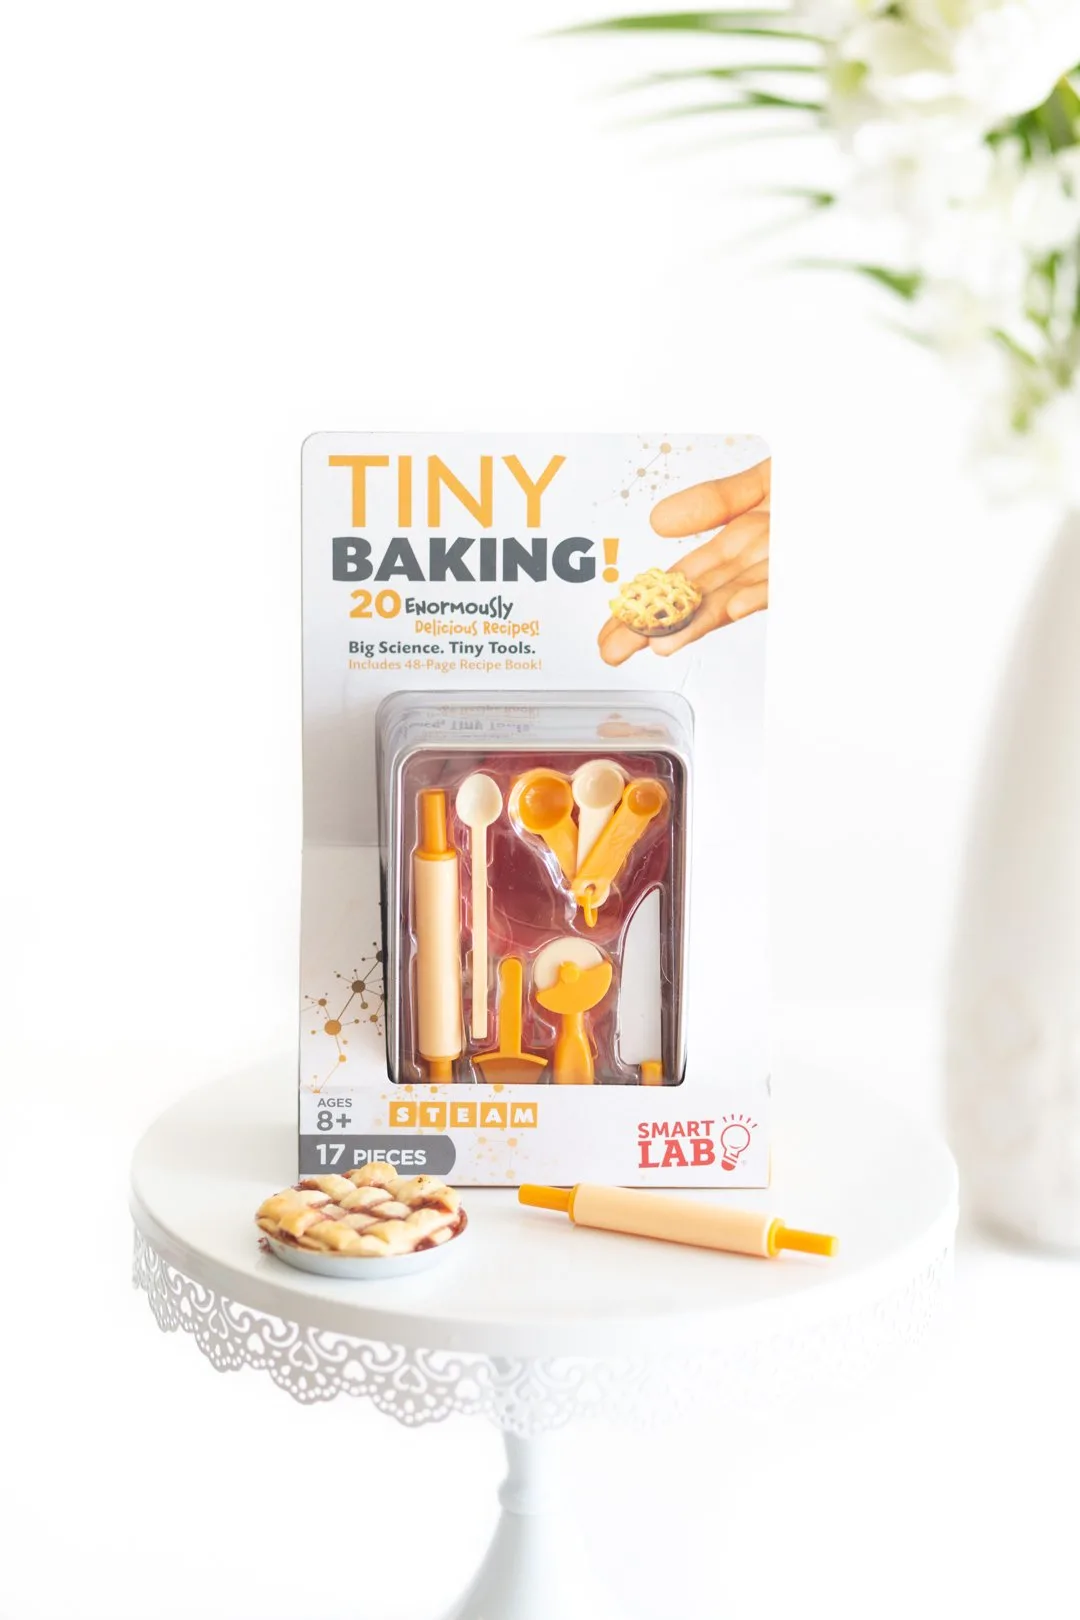 Tiny Baking! by SMARTLAB